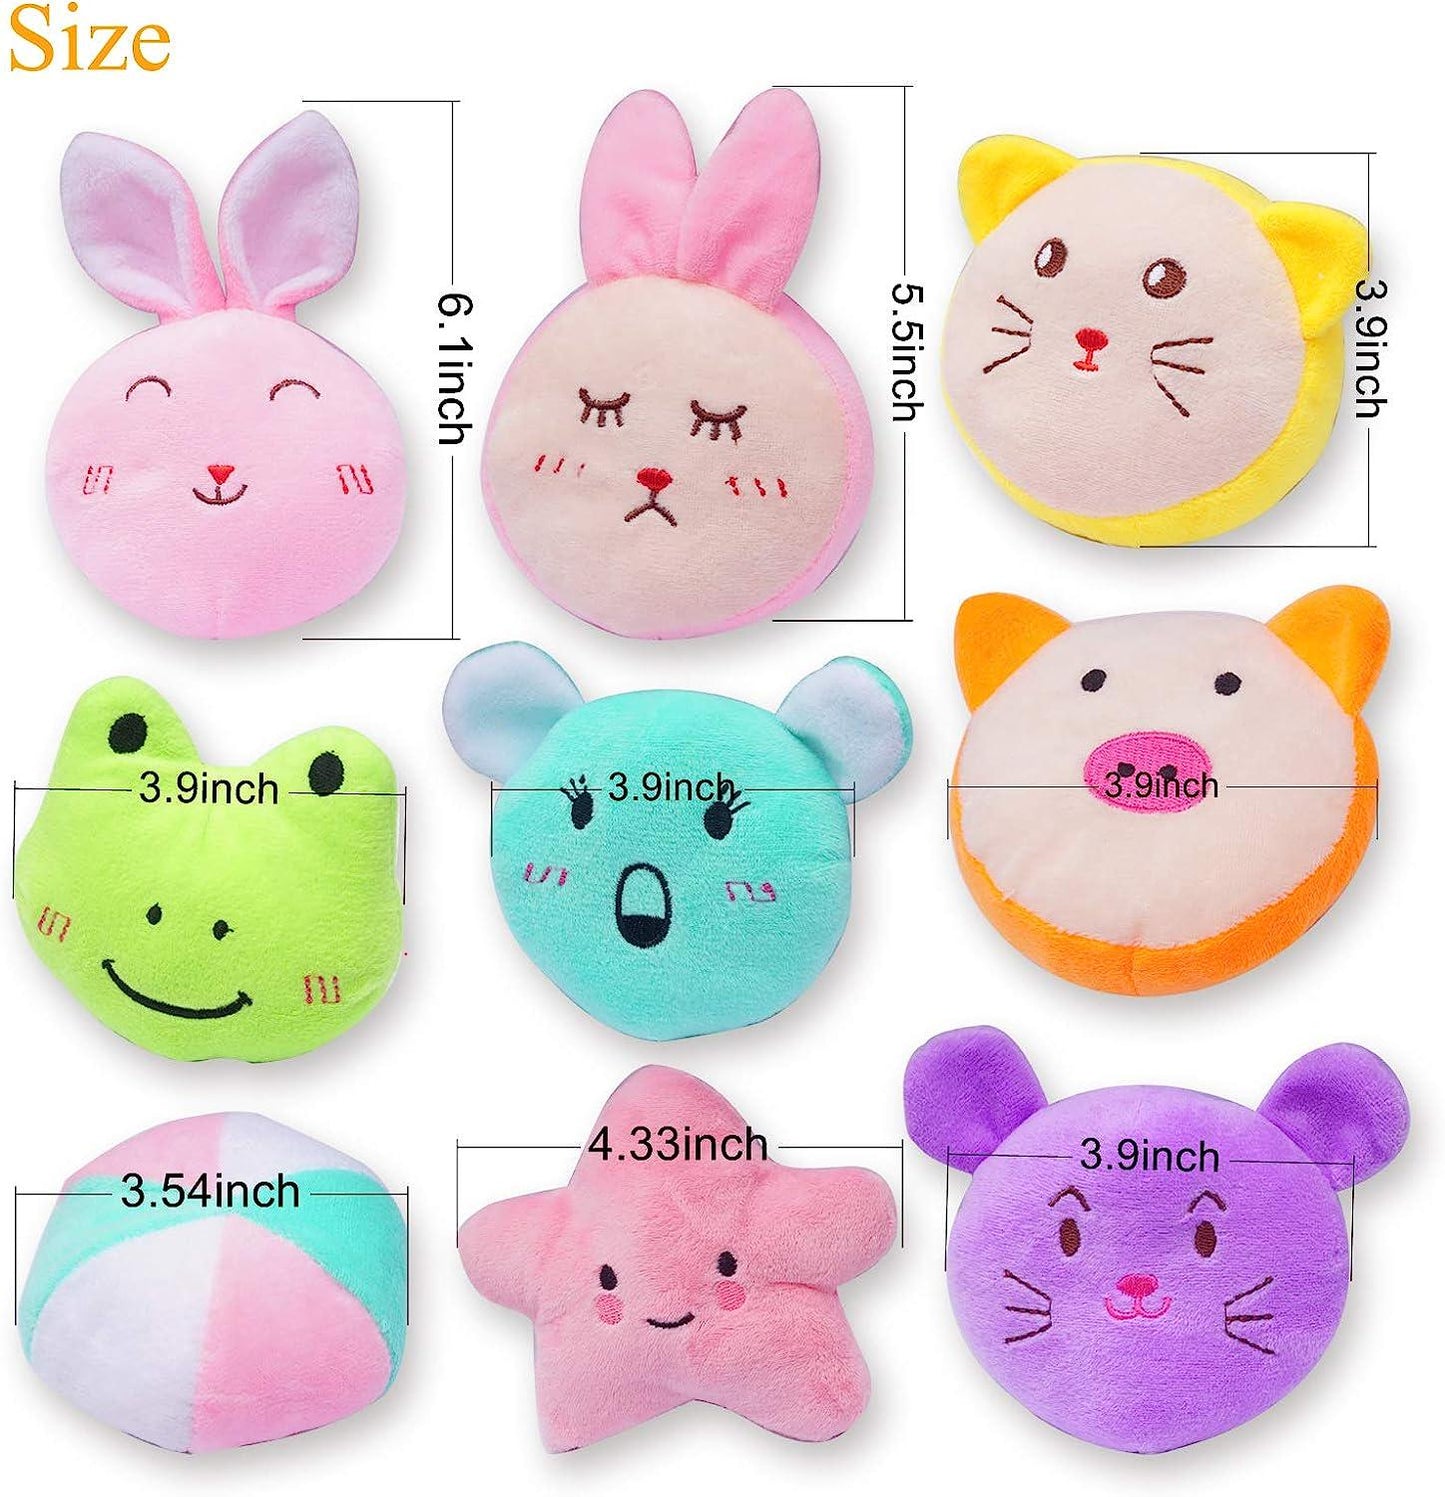 18 Pack Puppy Plush Squeaky Dog Toys Pets Small Dog Chew Toys for Puppies Bulk with Squeaker Soft Toy